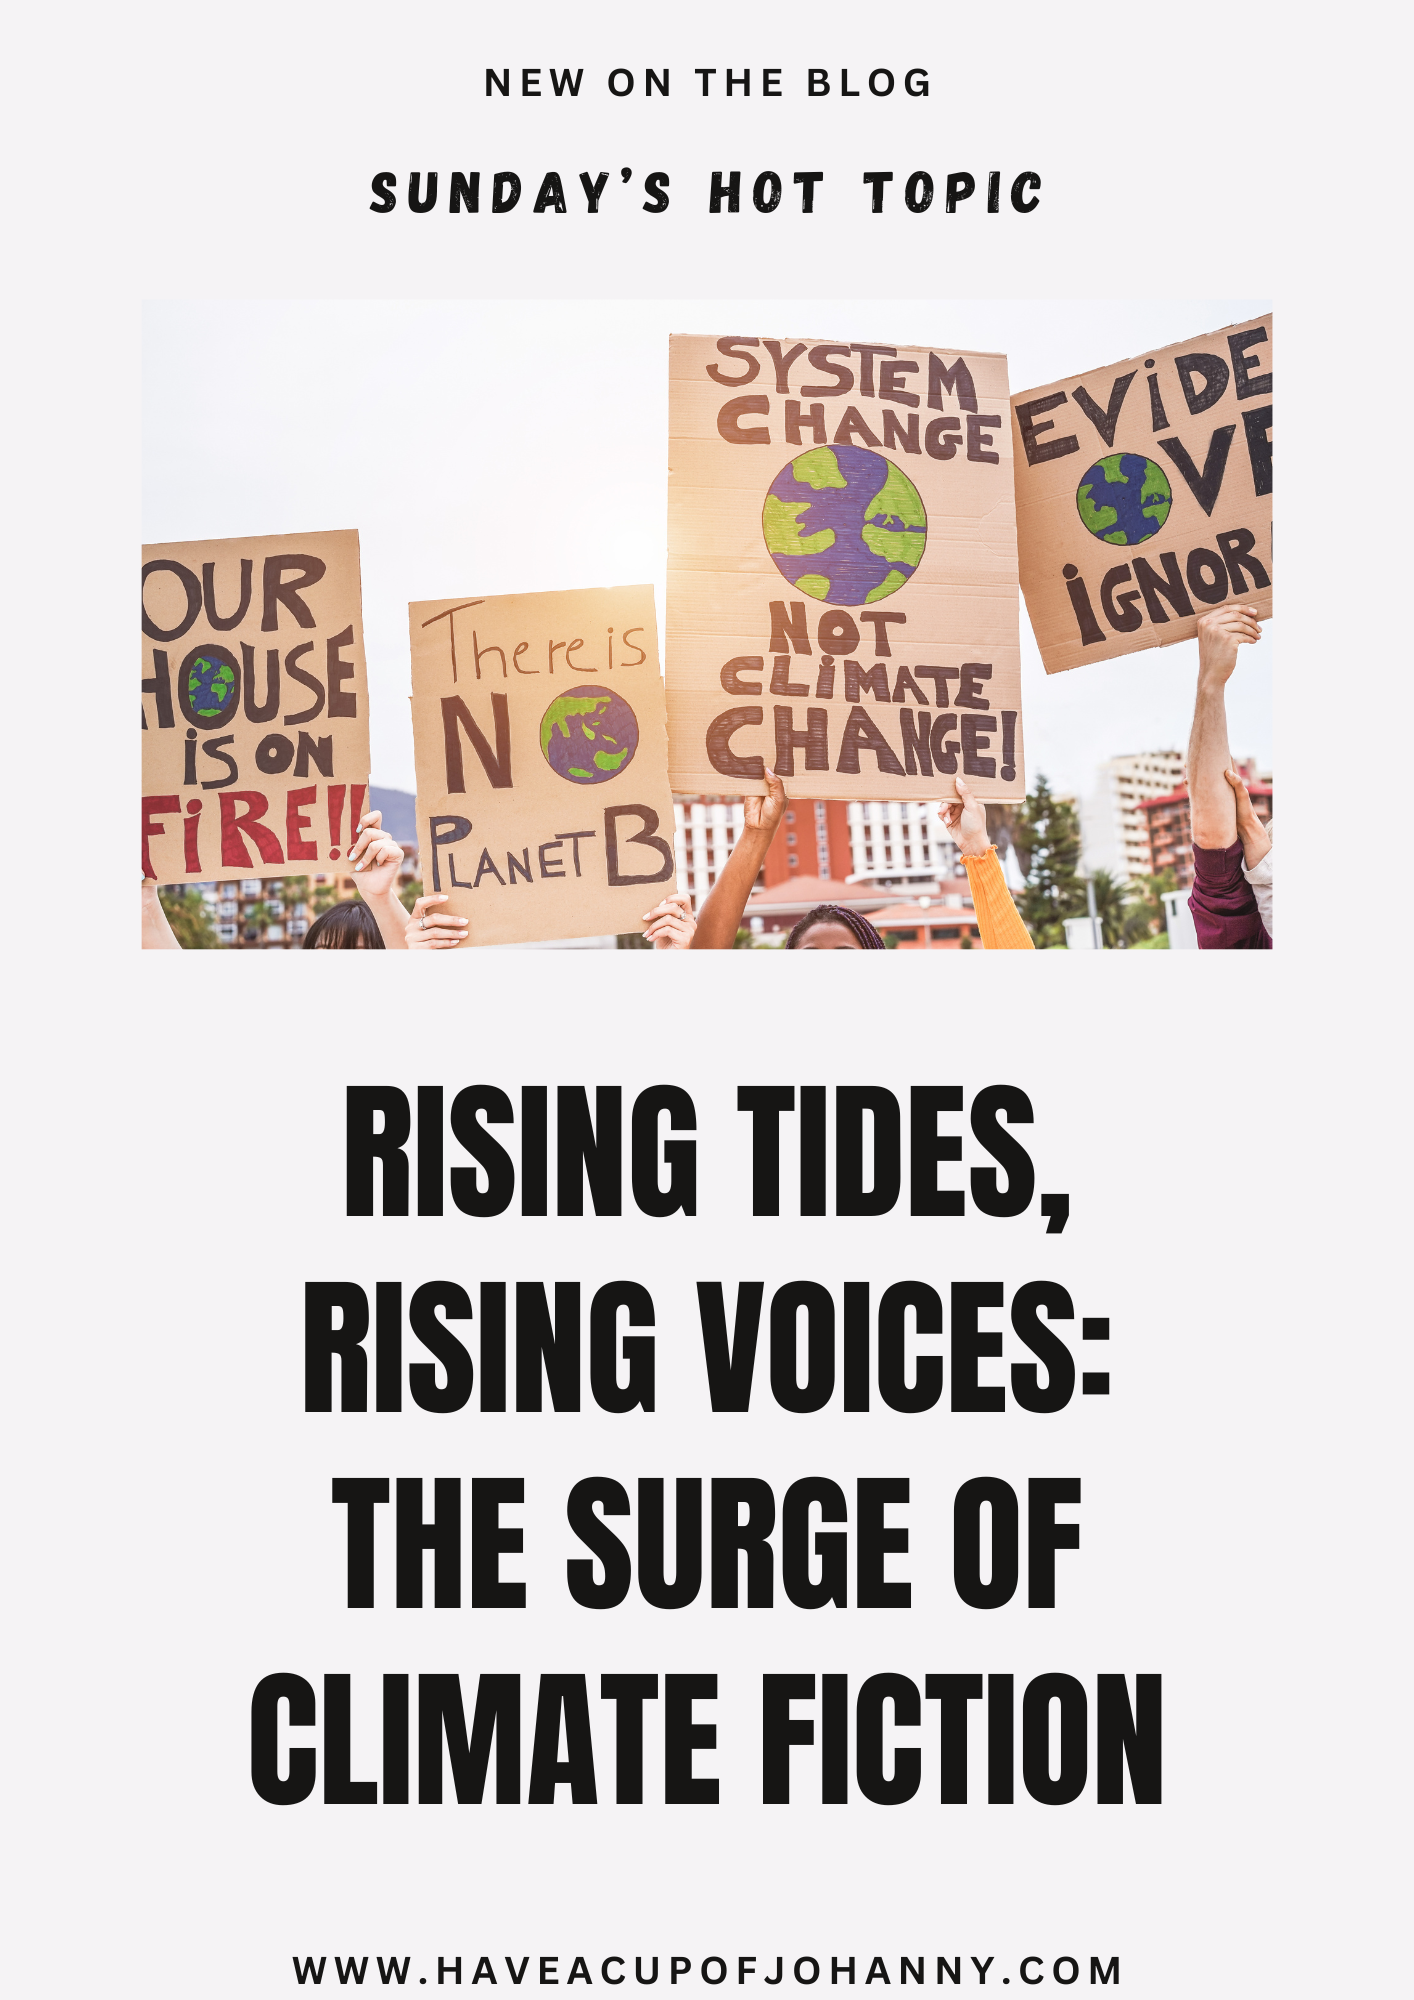 Rising Tides, Rising Voices: The Surge of Climate Fiction